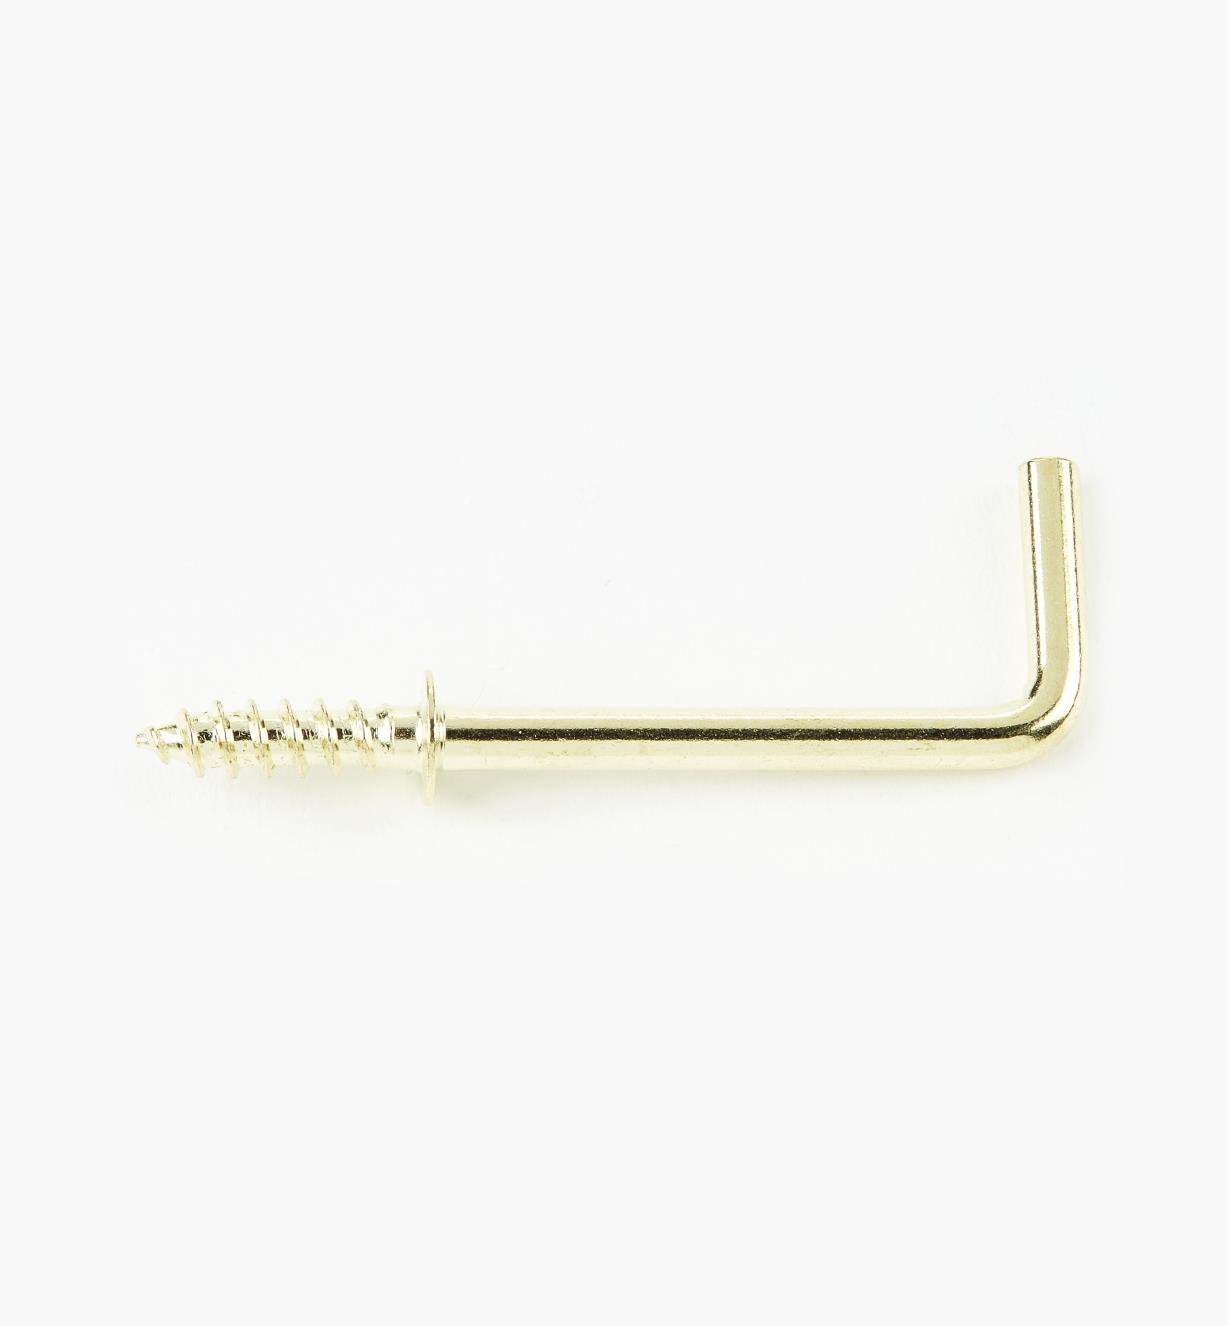 00S5604 - 1 1/4" Brass-Plated Square Hooks (50)